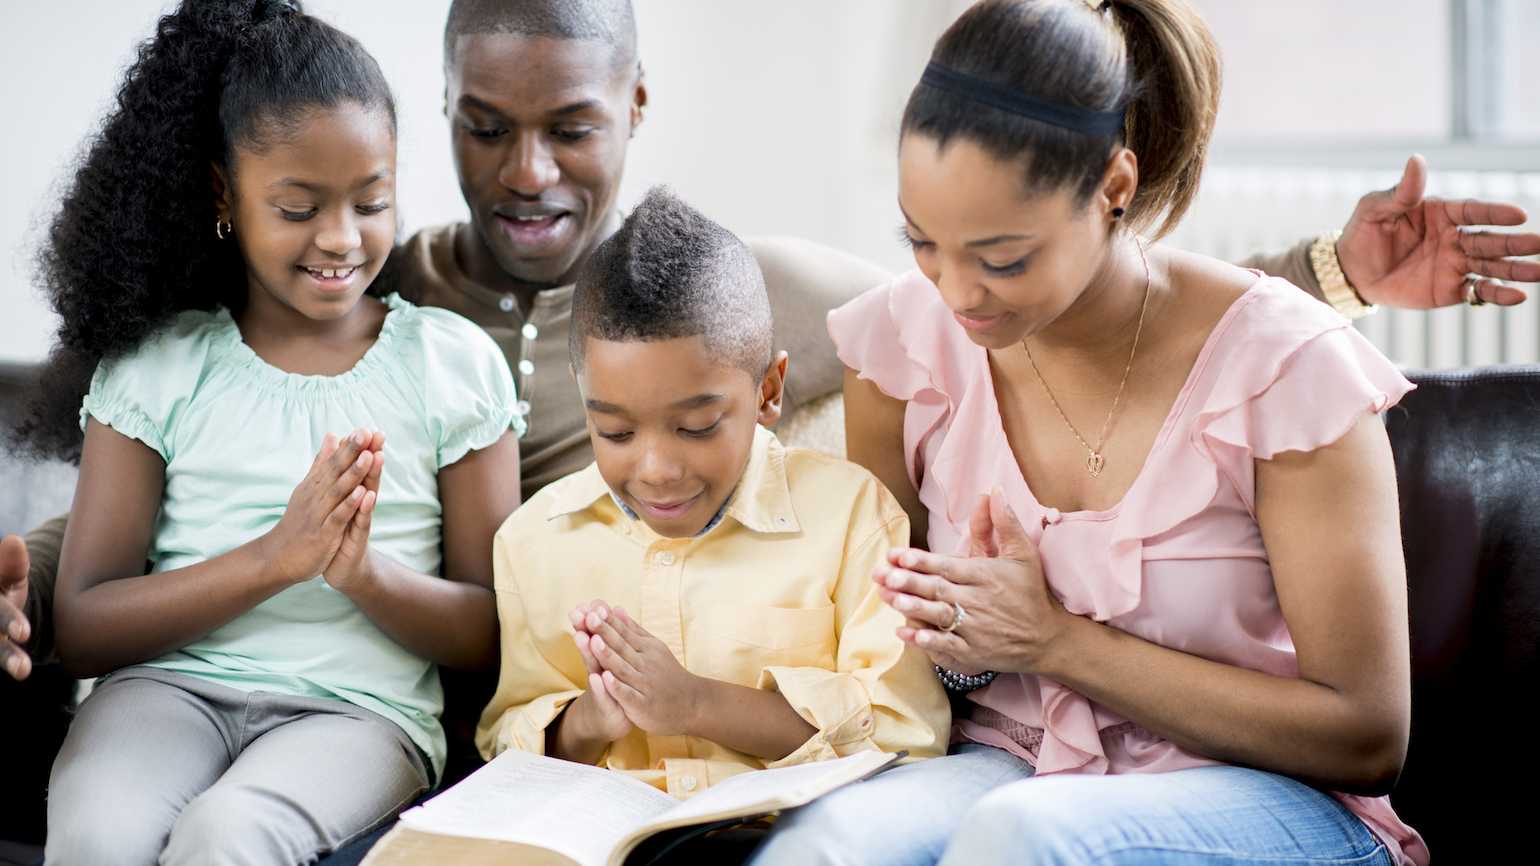 Praying Scripture For Your Children